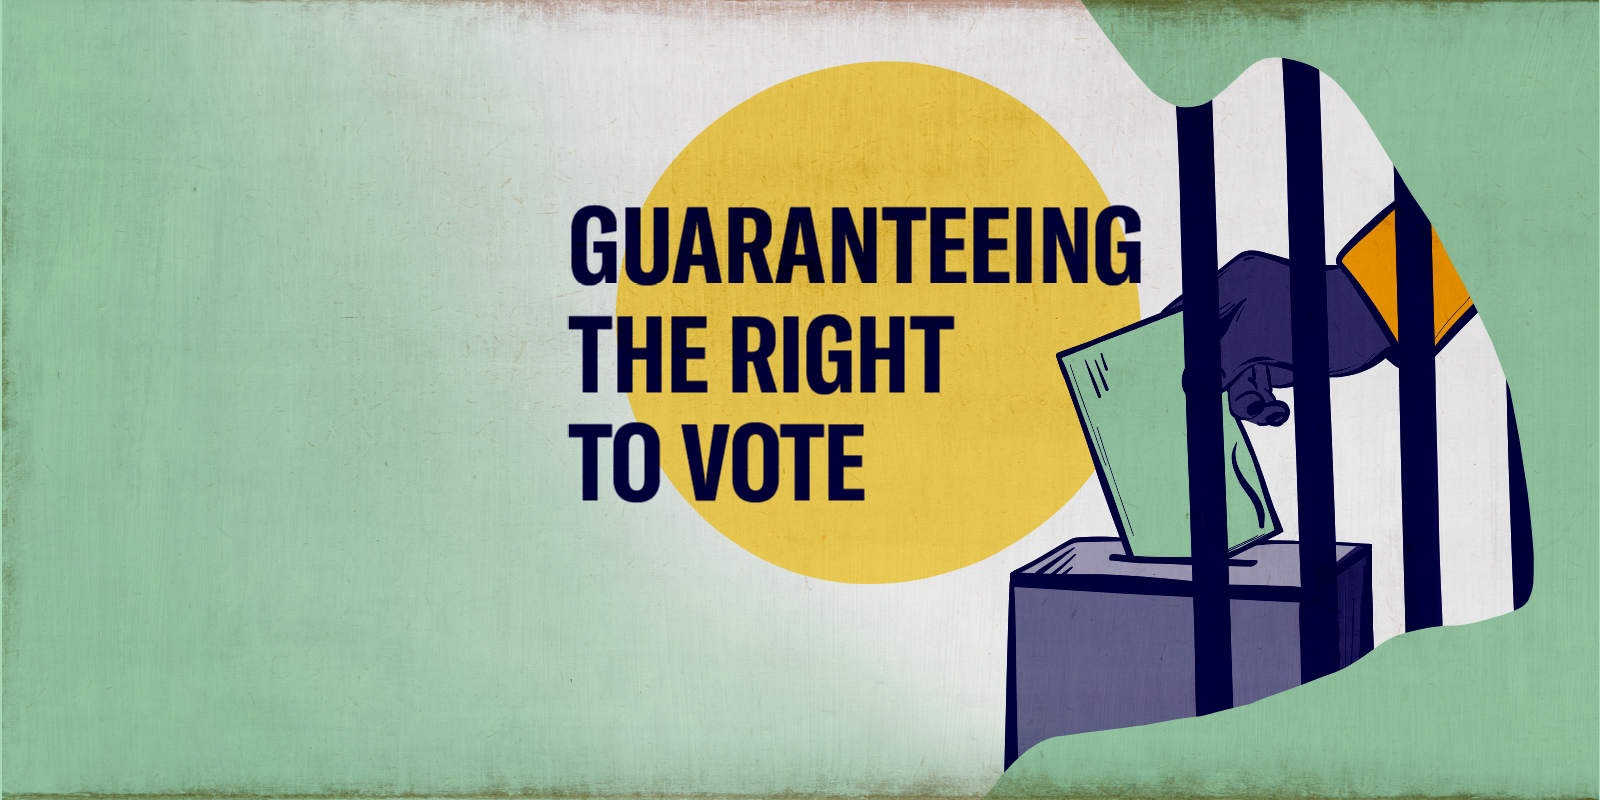 Support Guaranteeing the Right to Vote in the 2023 legislative session